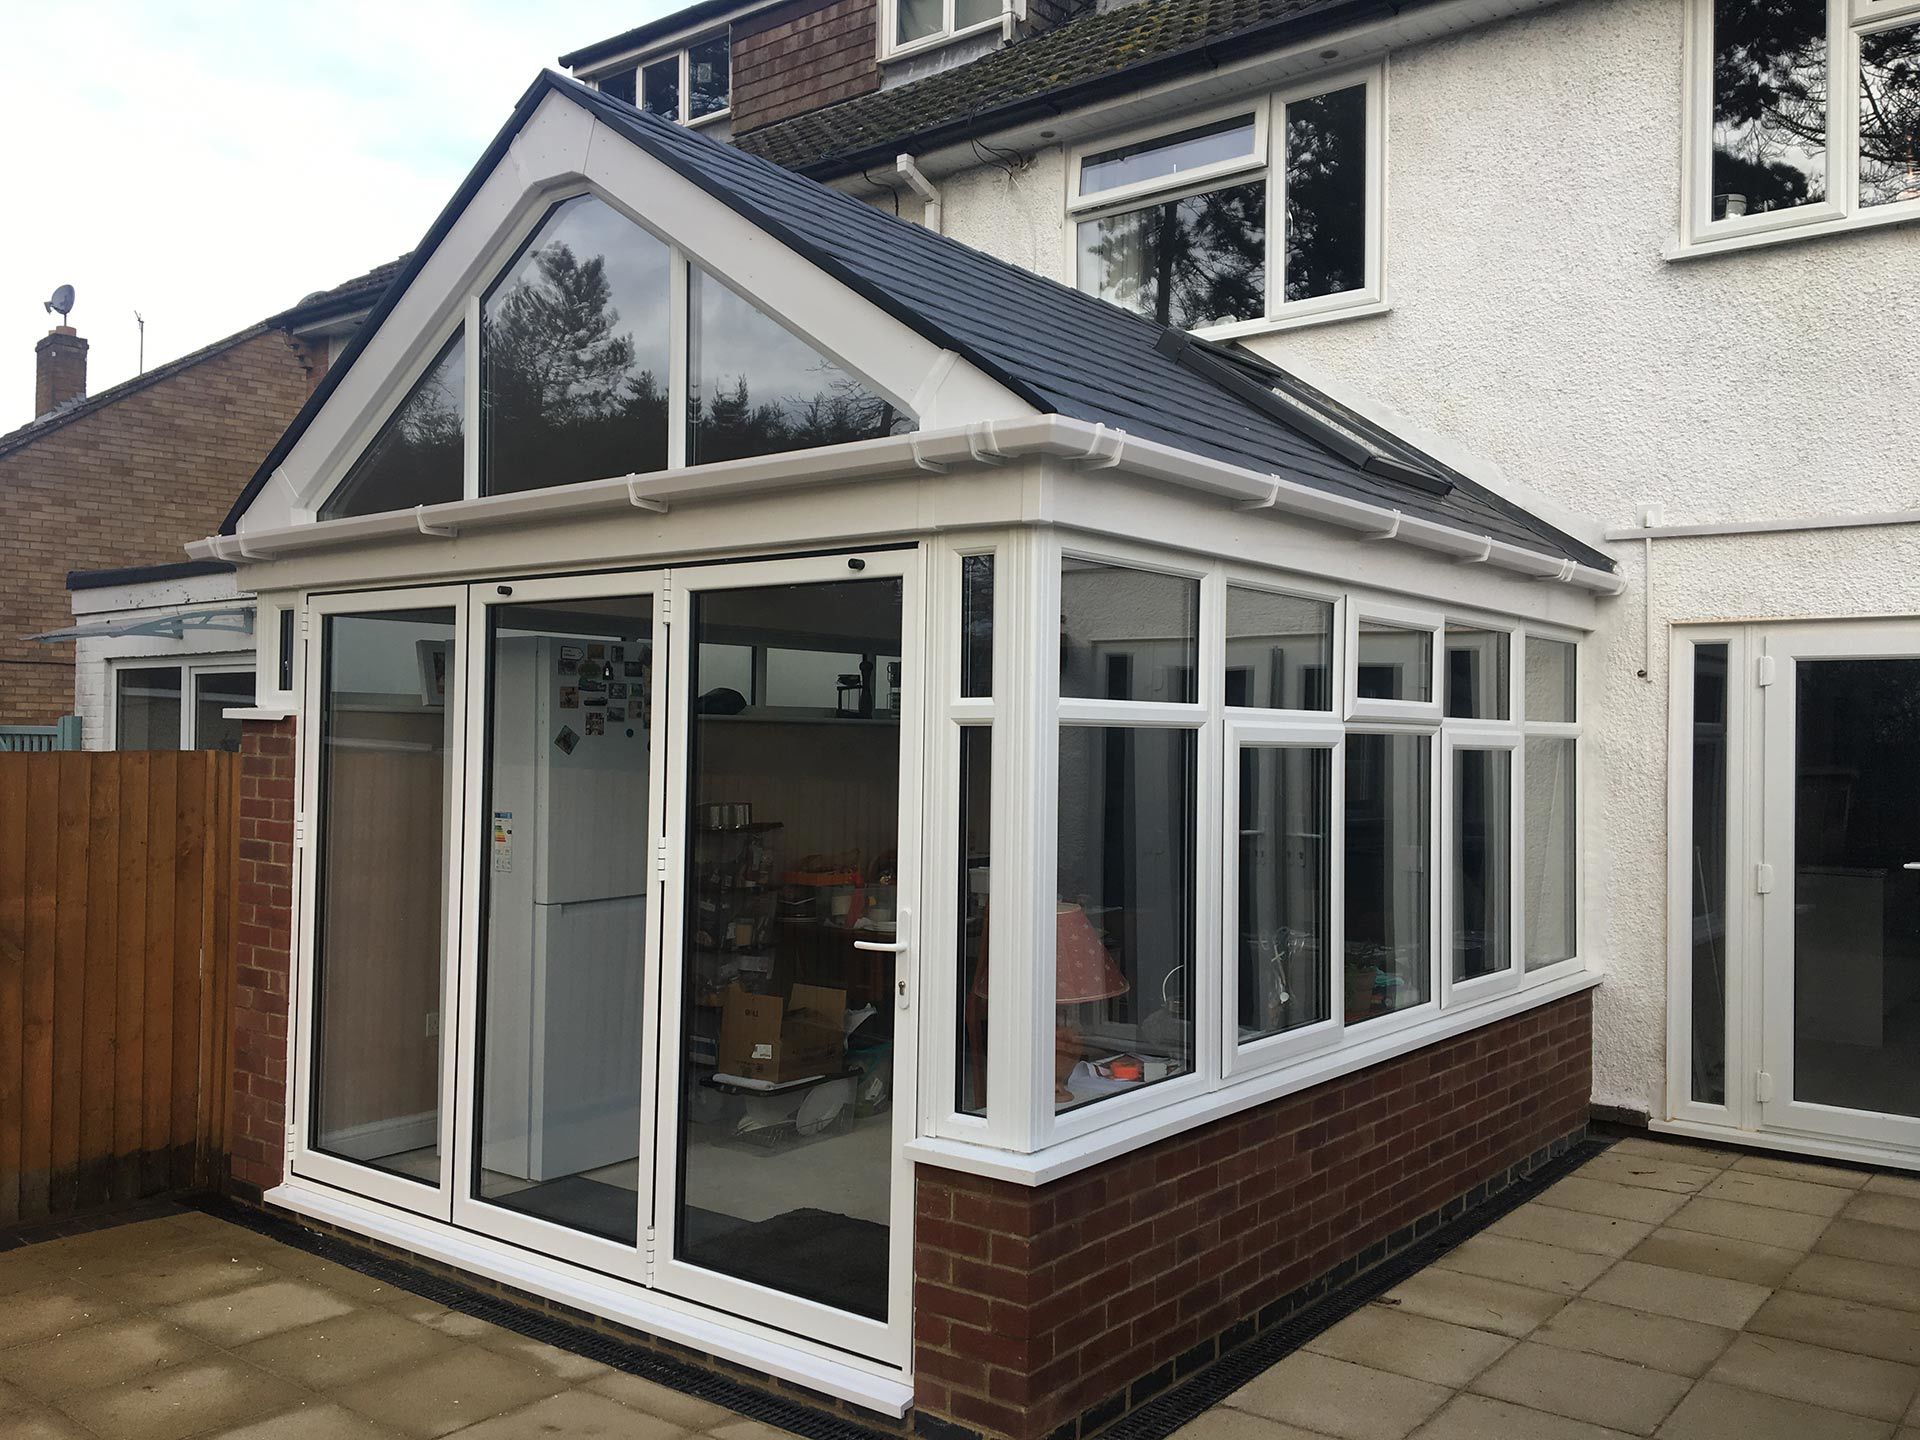 Gabel fronted solid conservatory roof, Northamptonshire